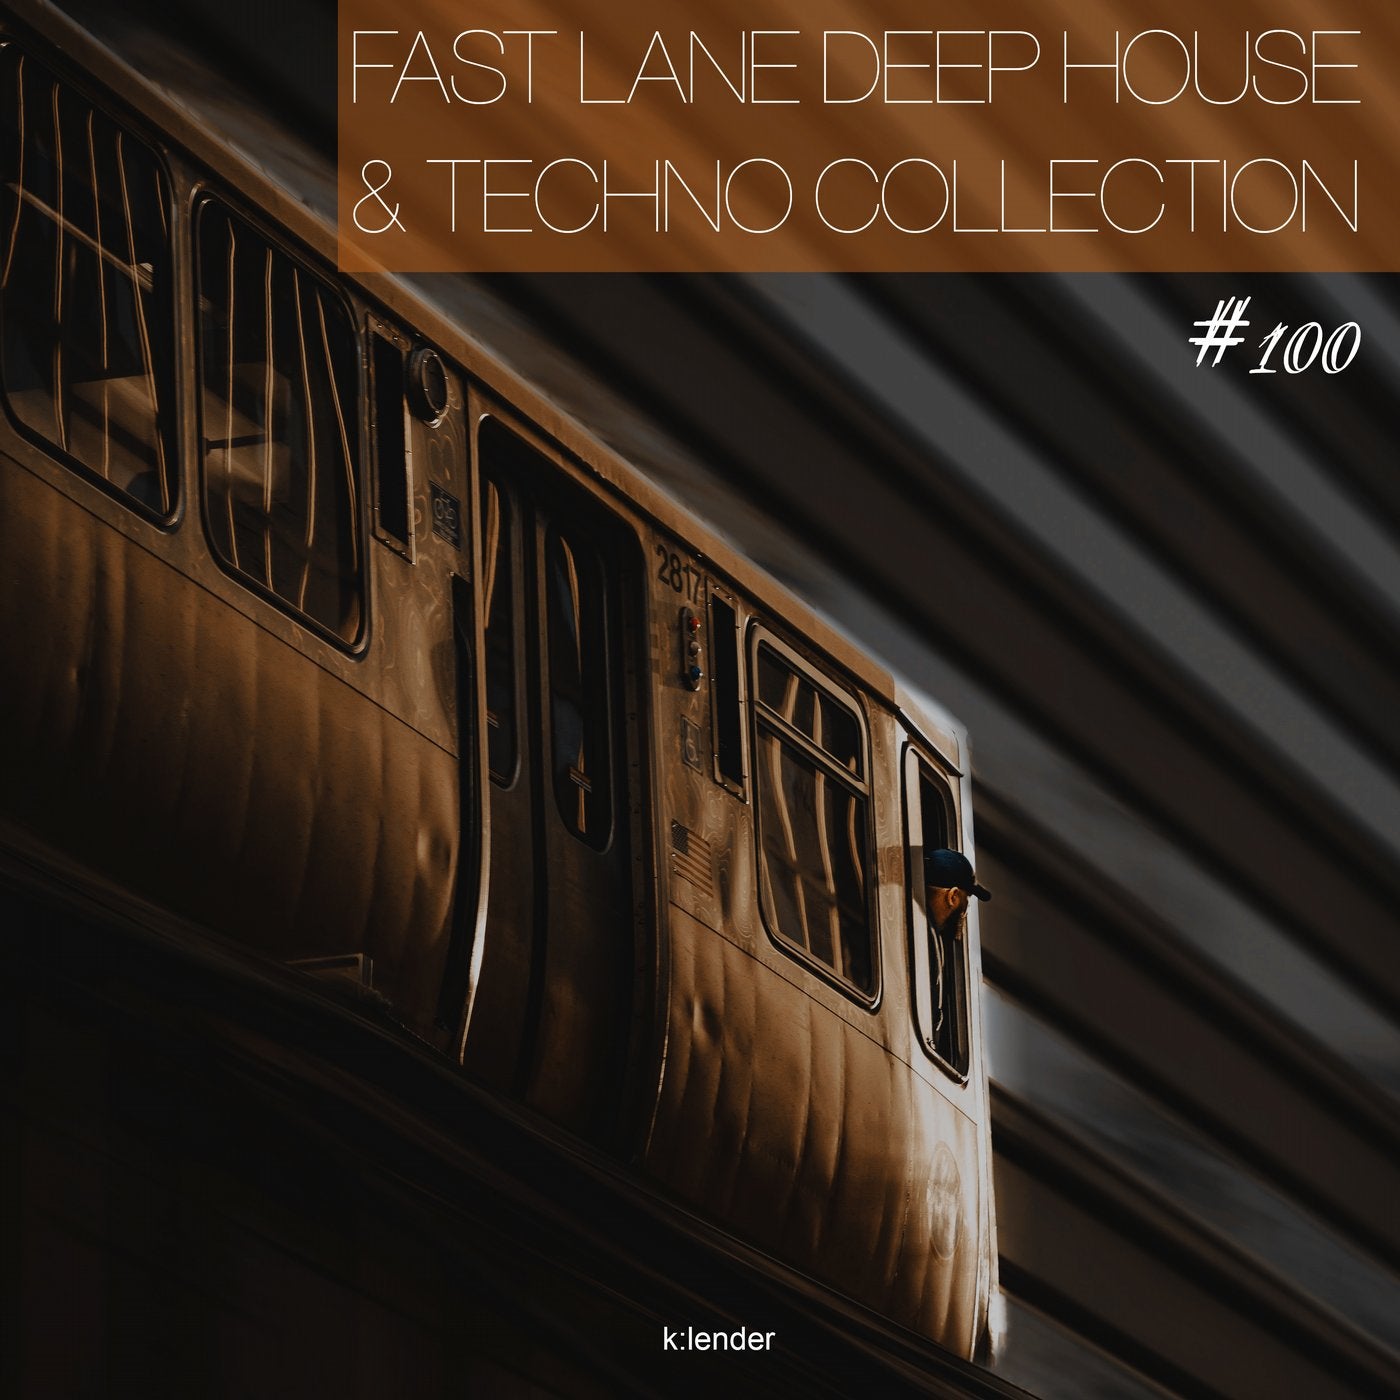 Fast Lane Deep House & Techno Collection #100